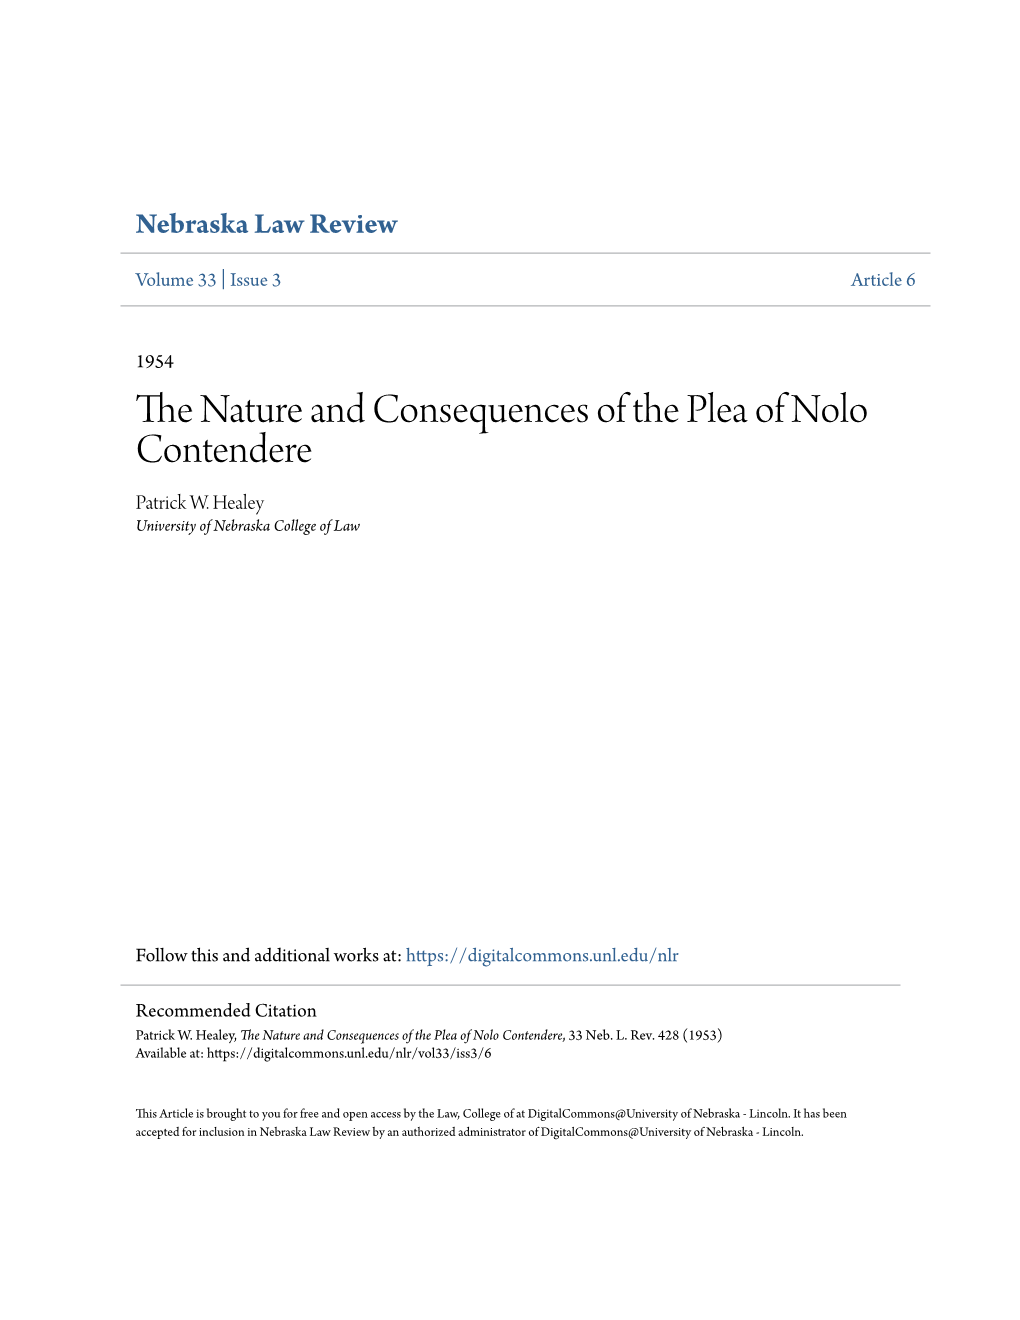 The Nature and Consequences of the Plea of Nolo Contendere, 33 Neb